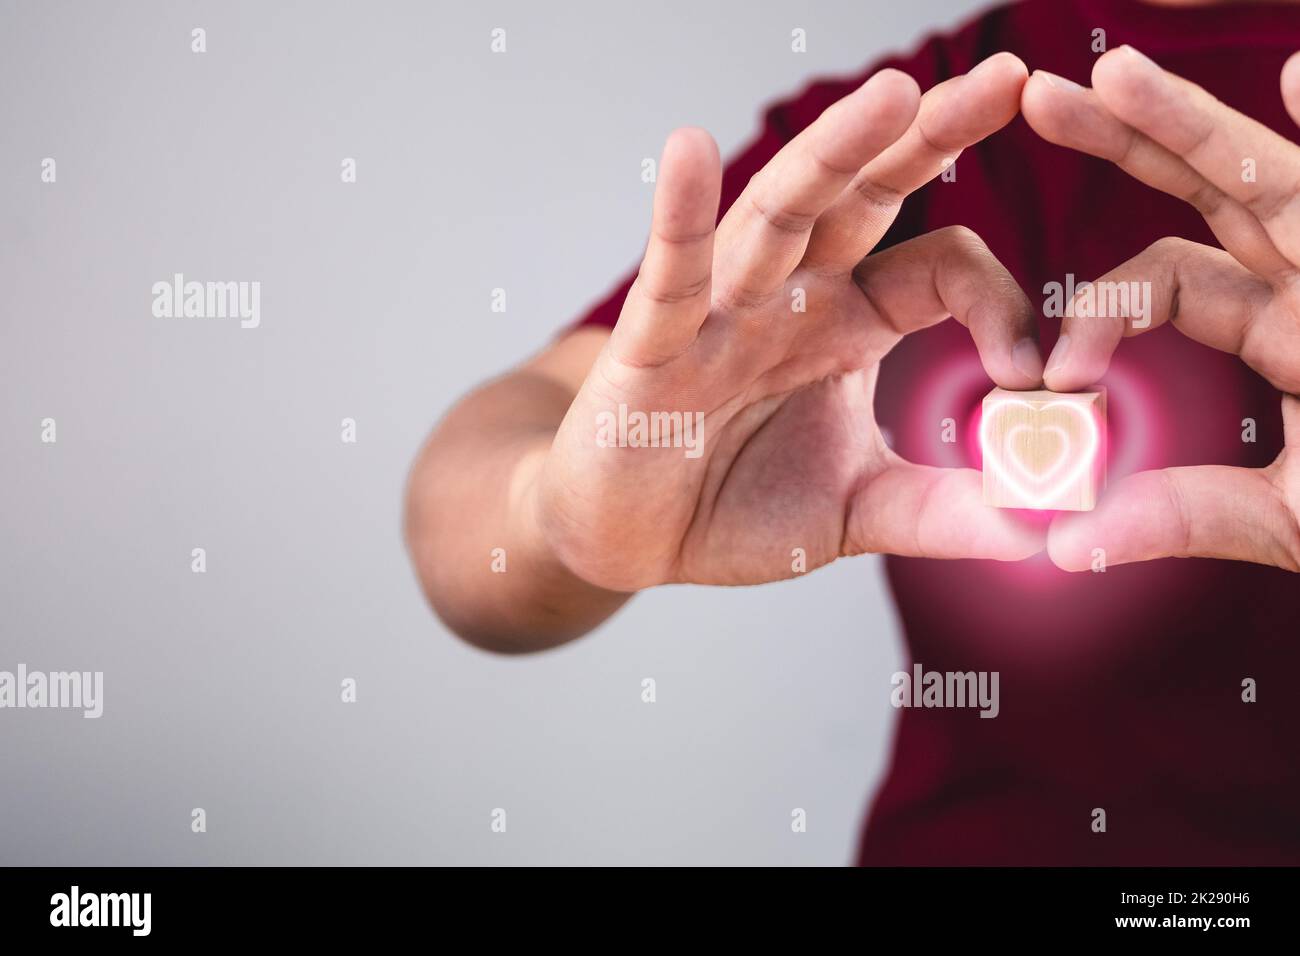 Person shows hands sign of love with heart visual effect. The man with red shirt in medium close up shot. Valentine's concept. Copy space for messages, words and texts. Stock Photo